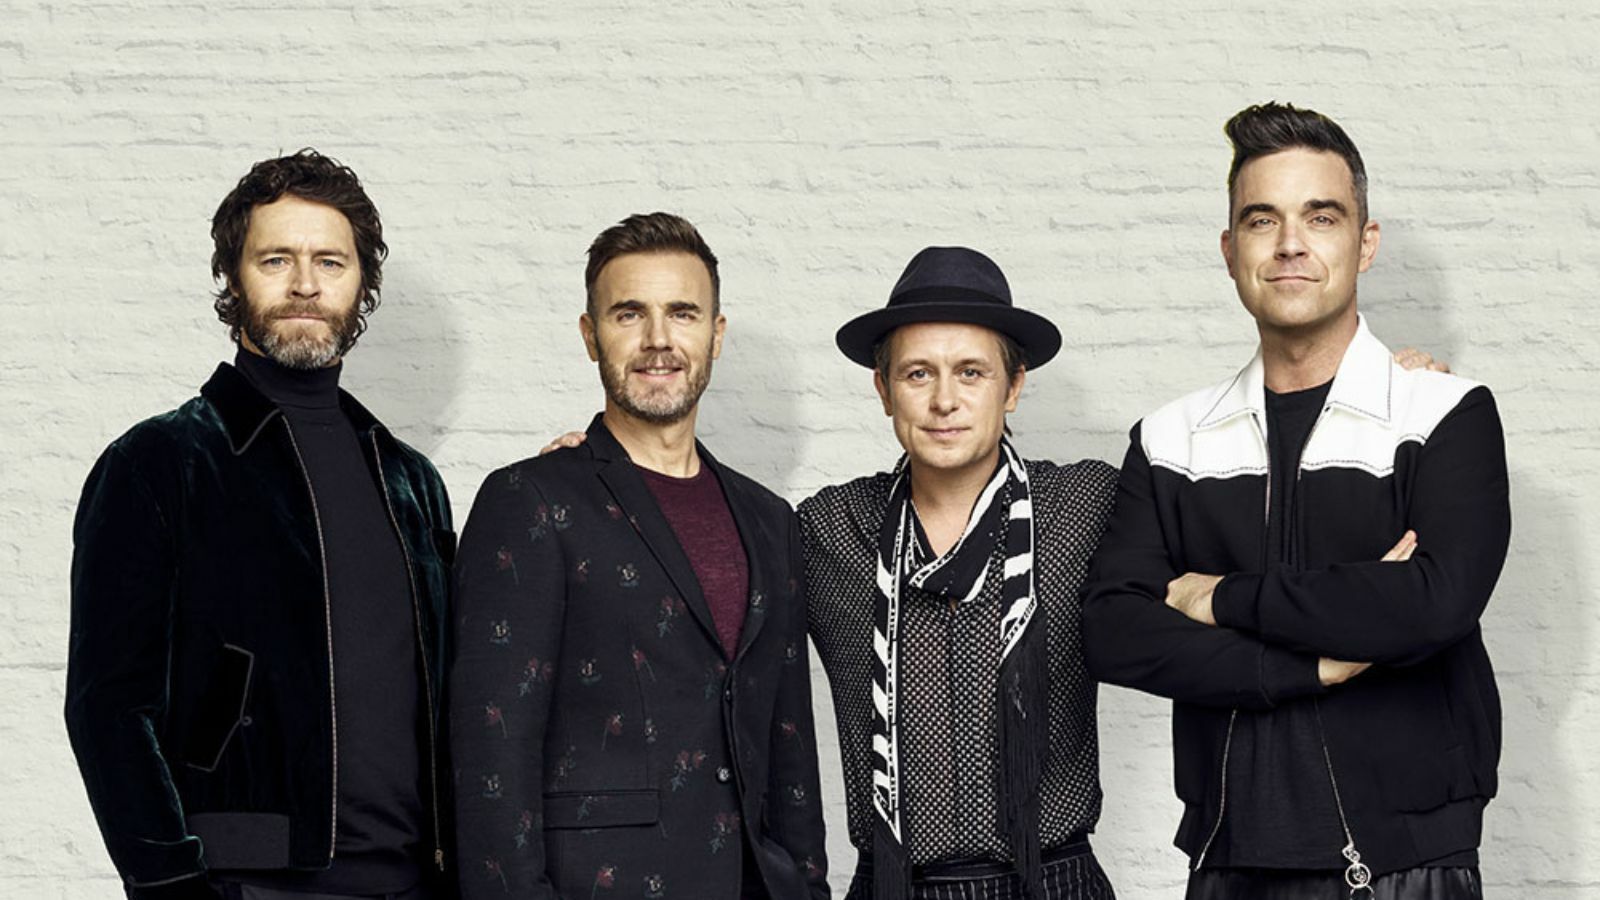 The top 5 Take That songs 